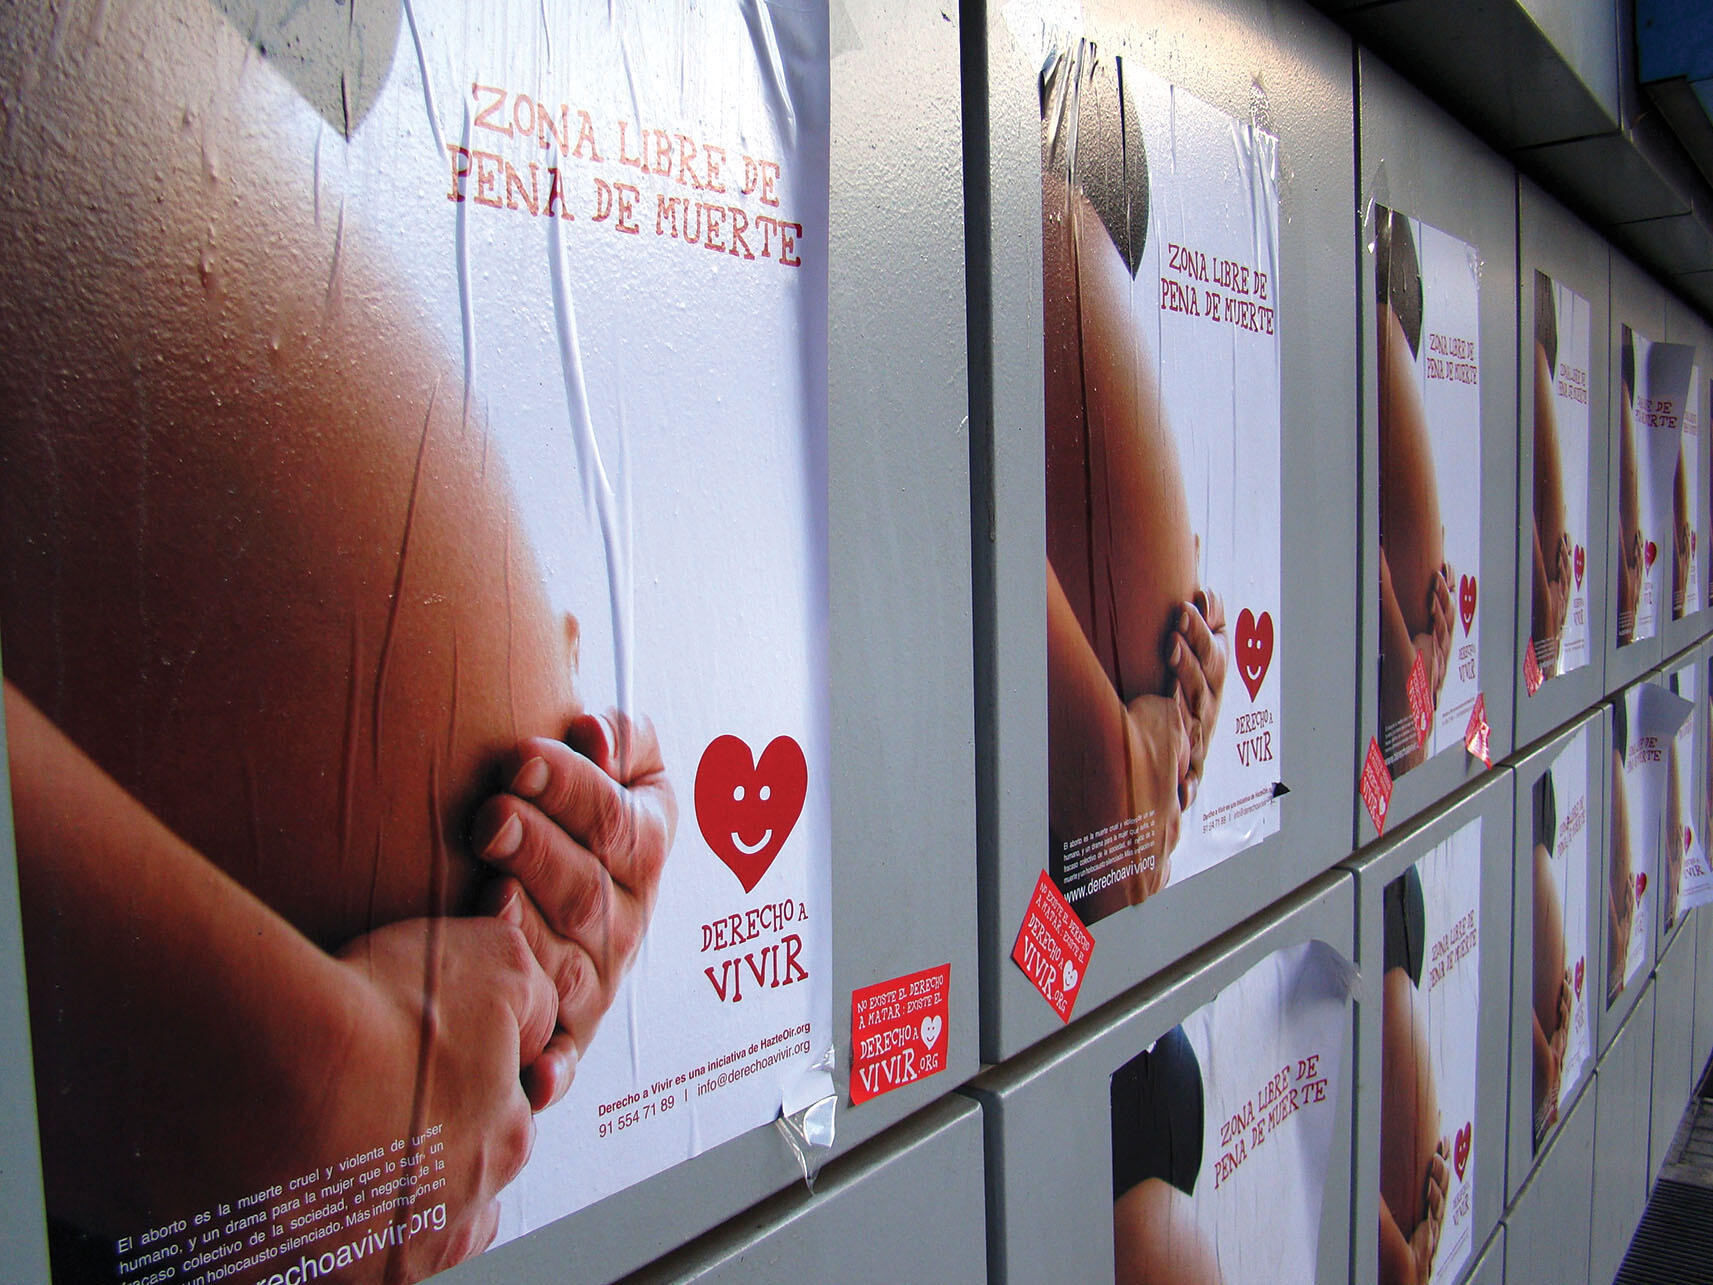 An anti-abortion poster in the Santiago subway reads “Death penalty-free zone.” (Photo courtesy of HazteOir.org.)